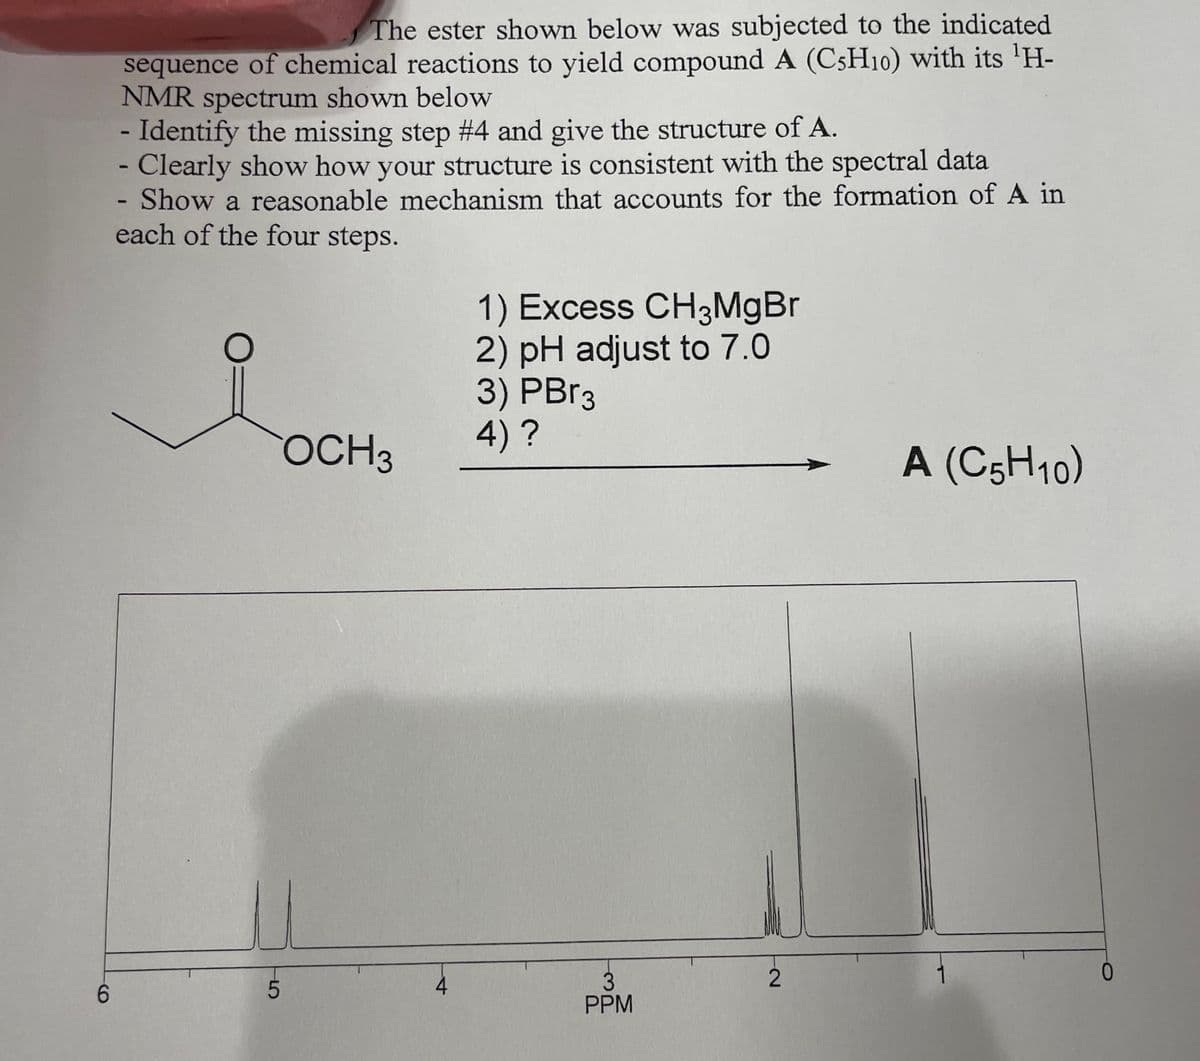 6
The ester shown below was subjected to the indicated
sequence of chemical reactions to yield compound A (C5H10) with its ¹H-
NMR spectrum shown below
- Identify the missing step #4 and give the structure of A.
- Clearly show how your structure is consistent with the spectral data
Show a reasonable mechanism that accounts for the formation of A in
each of the four steps.
O
CT
OCH 3
4
1) Excess CH3MgBr
2) pH adjust to 7.0
3) PBr3
4) ?
3
PPM
2
A (C5H10)
0